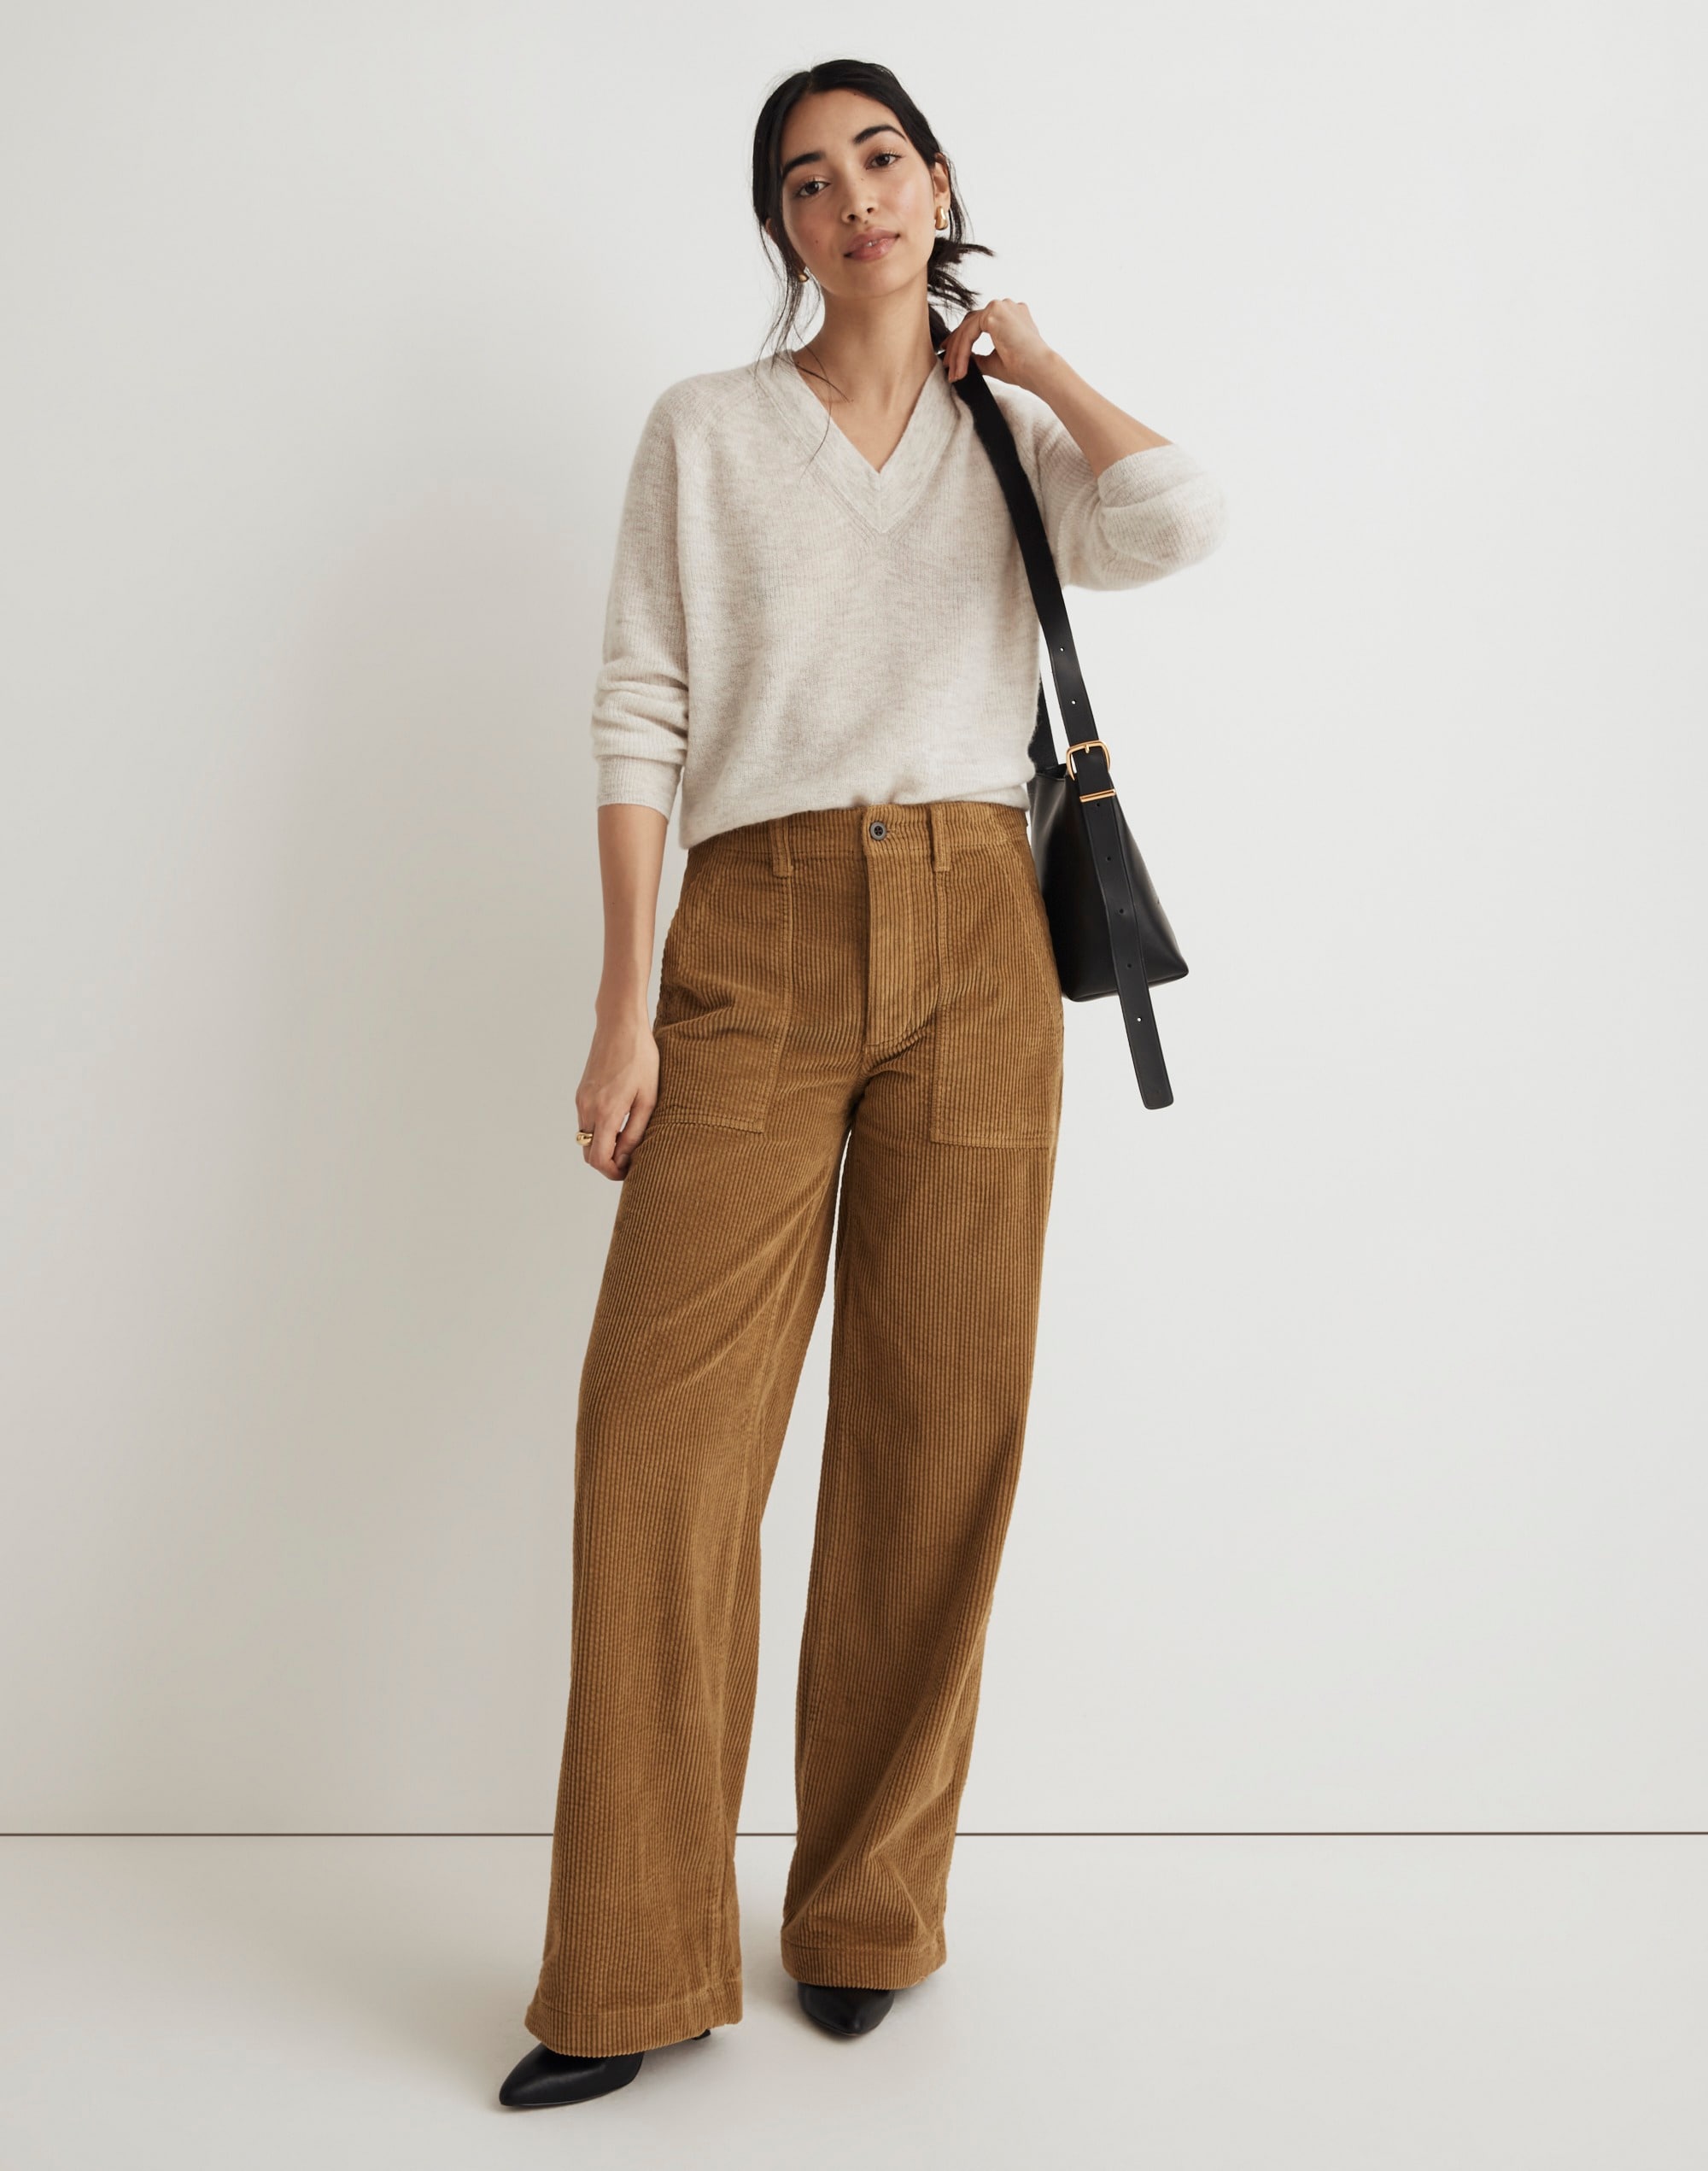 Griff Superwide-Leg Fatigue Cargo Pants in Garment-Dyed Corduroy